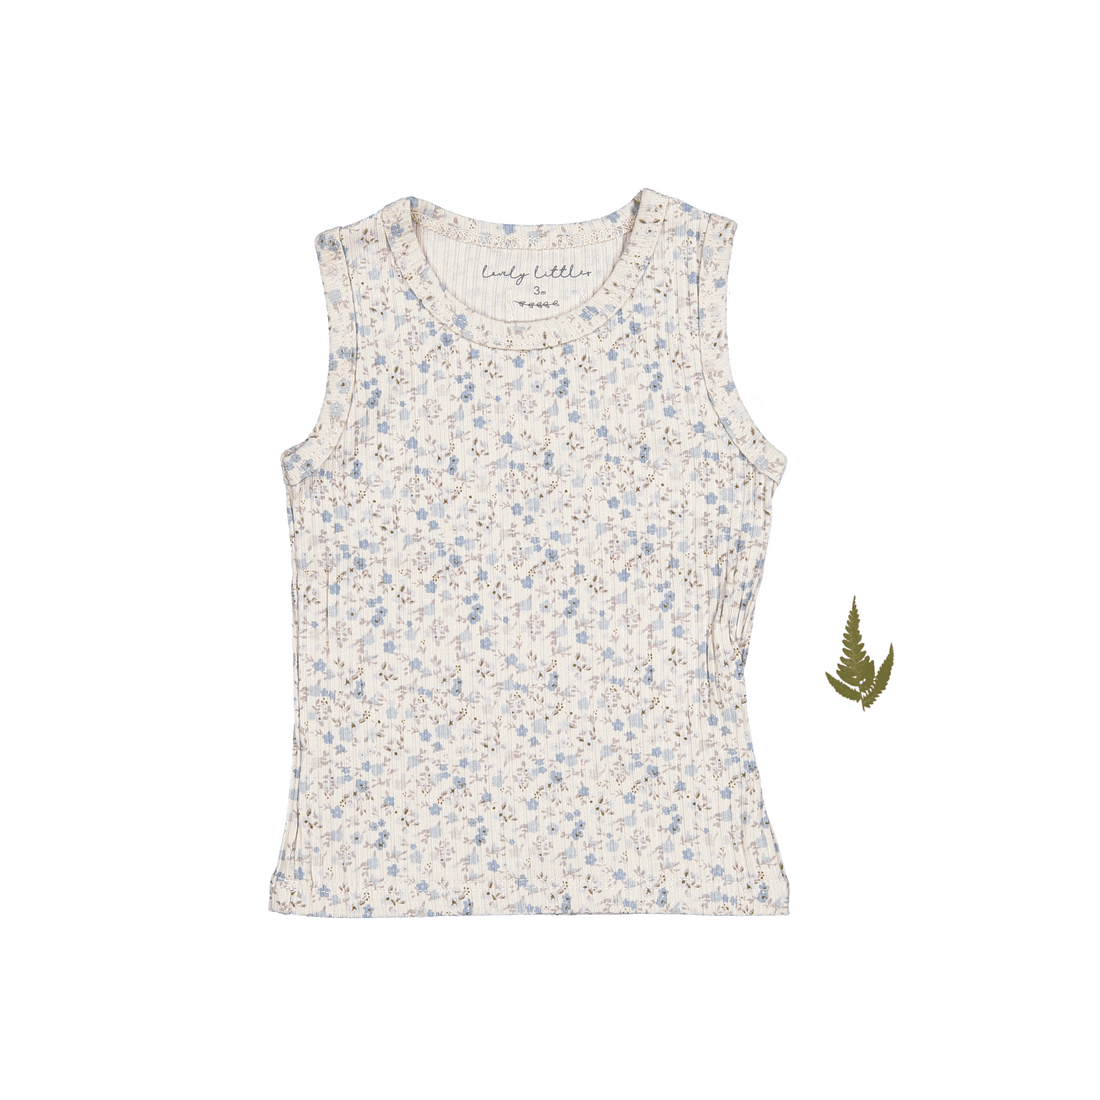 The Printed Tank - Dusty Blue Floral